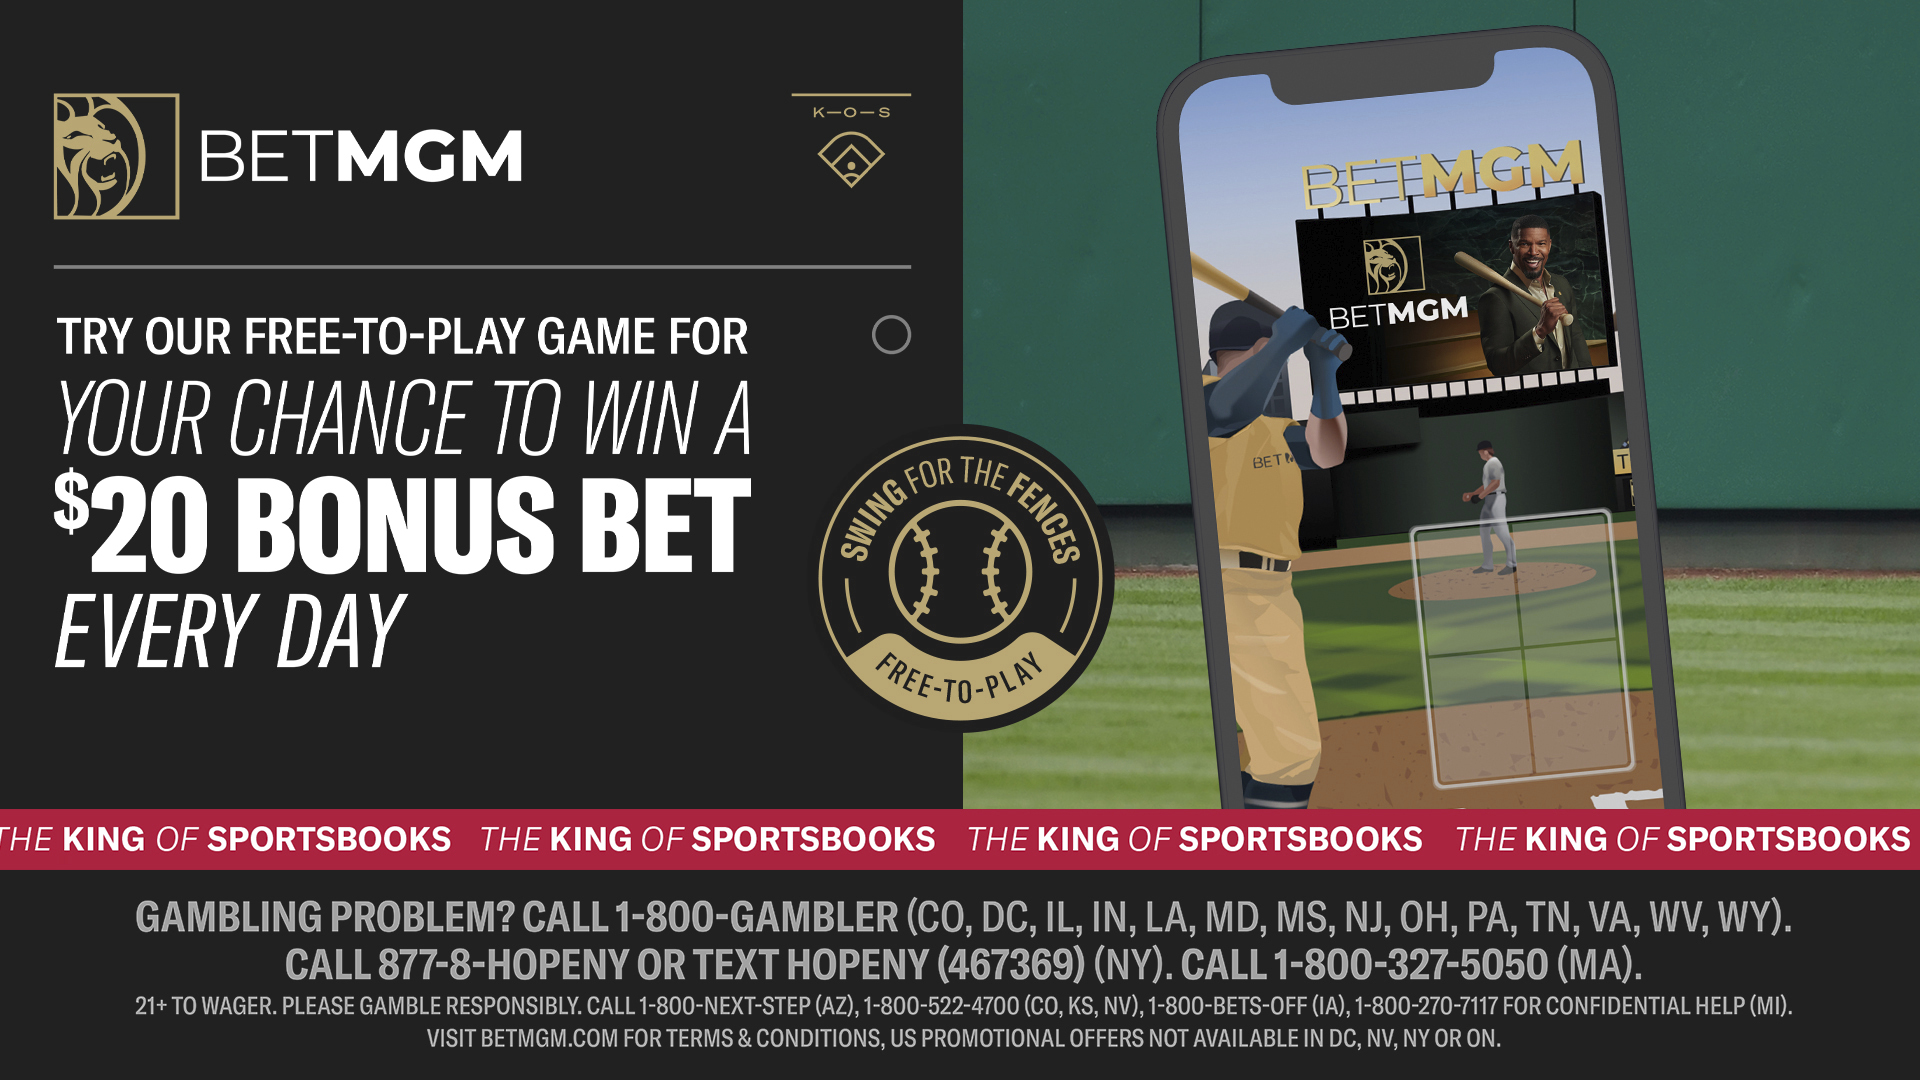 Win Bonus Bets & Tokens With This Free Daily BetMGM Game